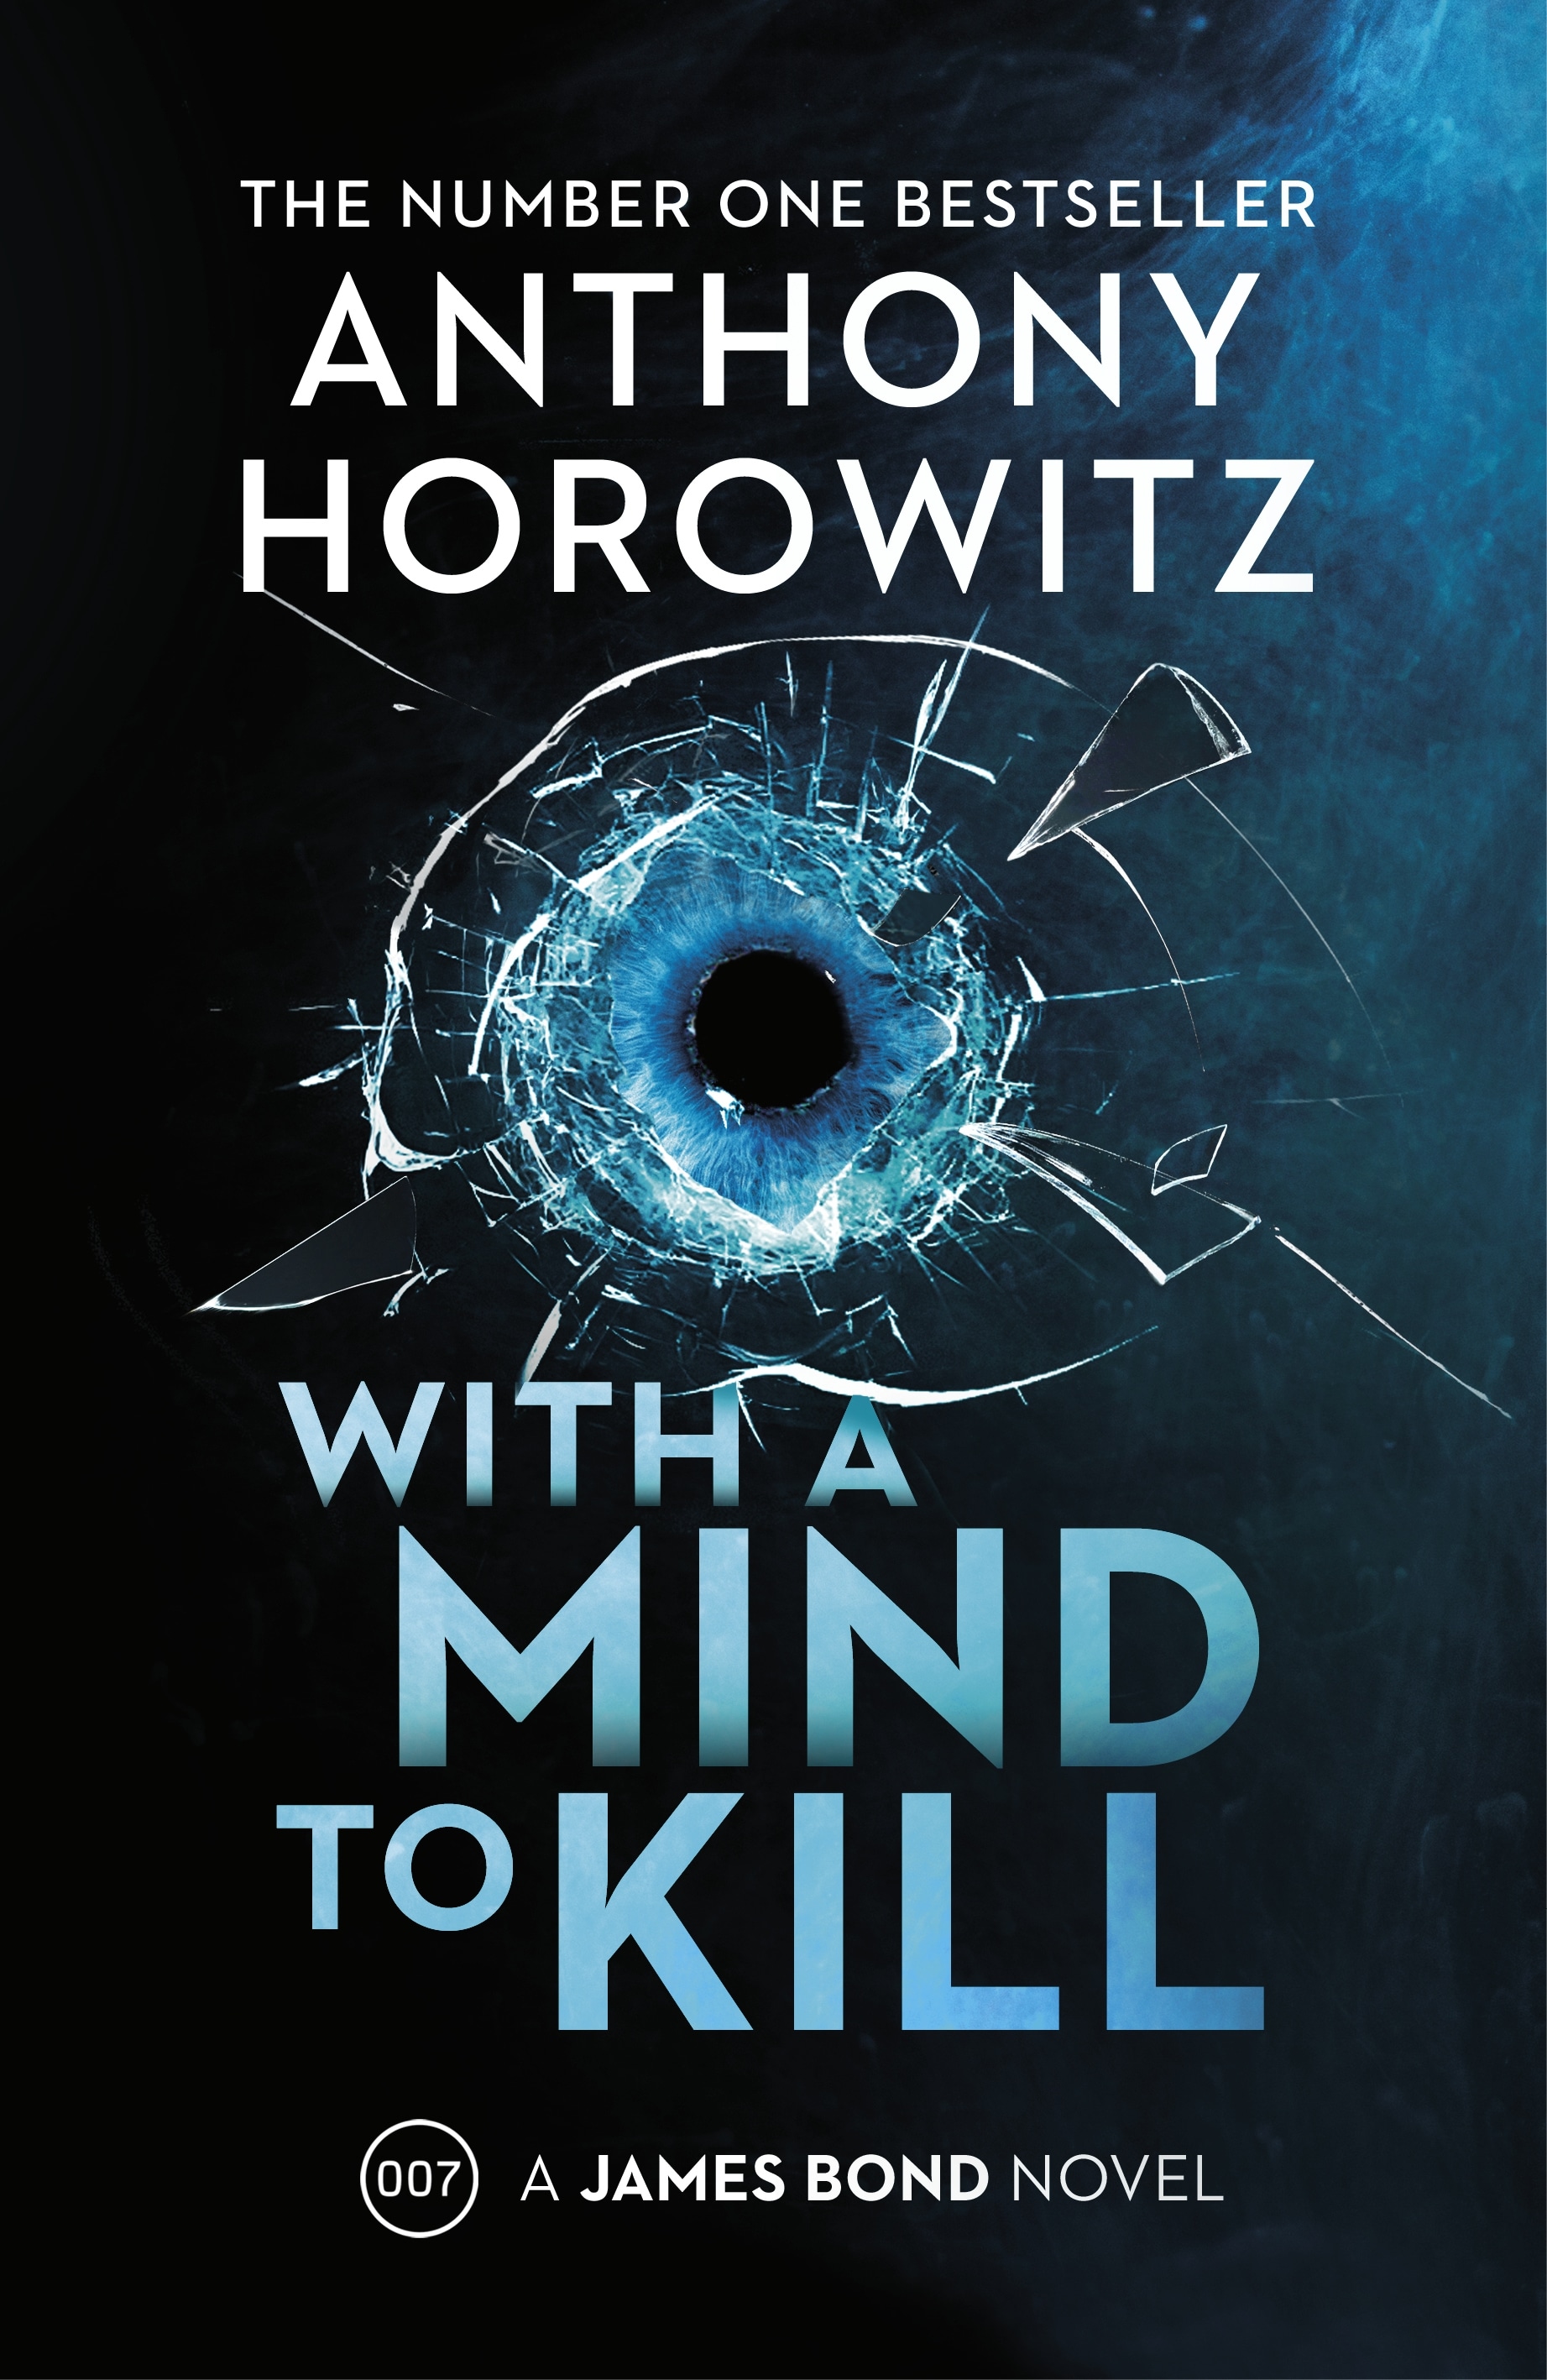 Book “With a Mind to Kill” by Anthony Horowitz — May 26, 2022